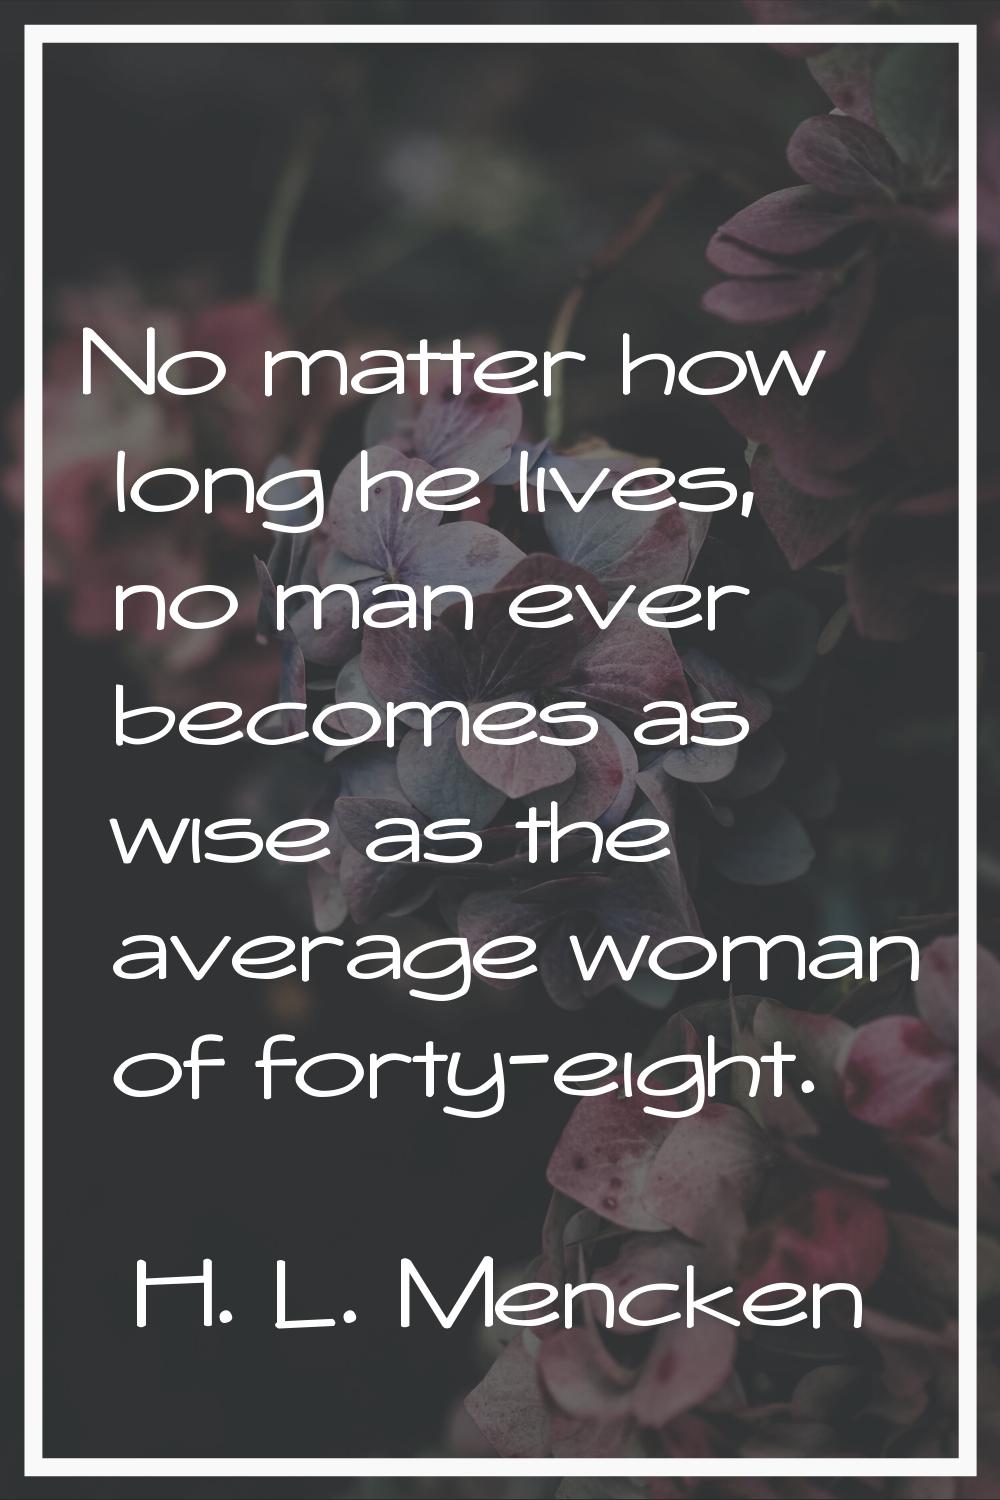 No matter how long he lives, no man ever becomes as wise as the average woman of forty-eight.